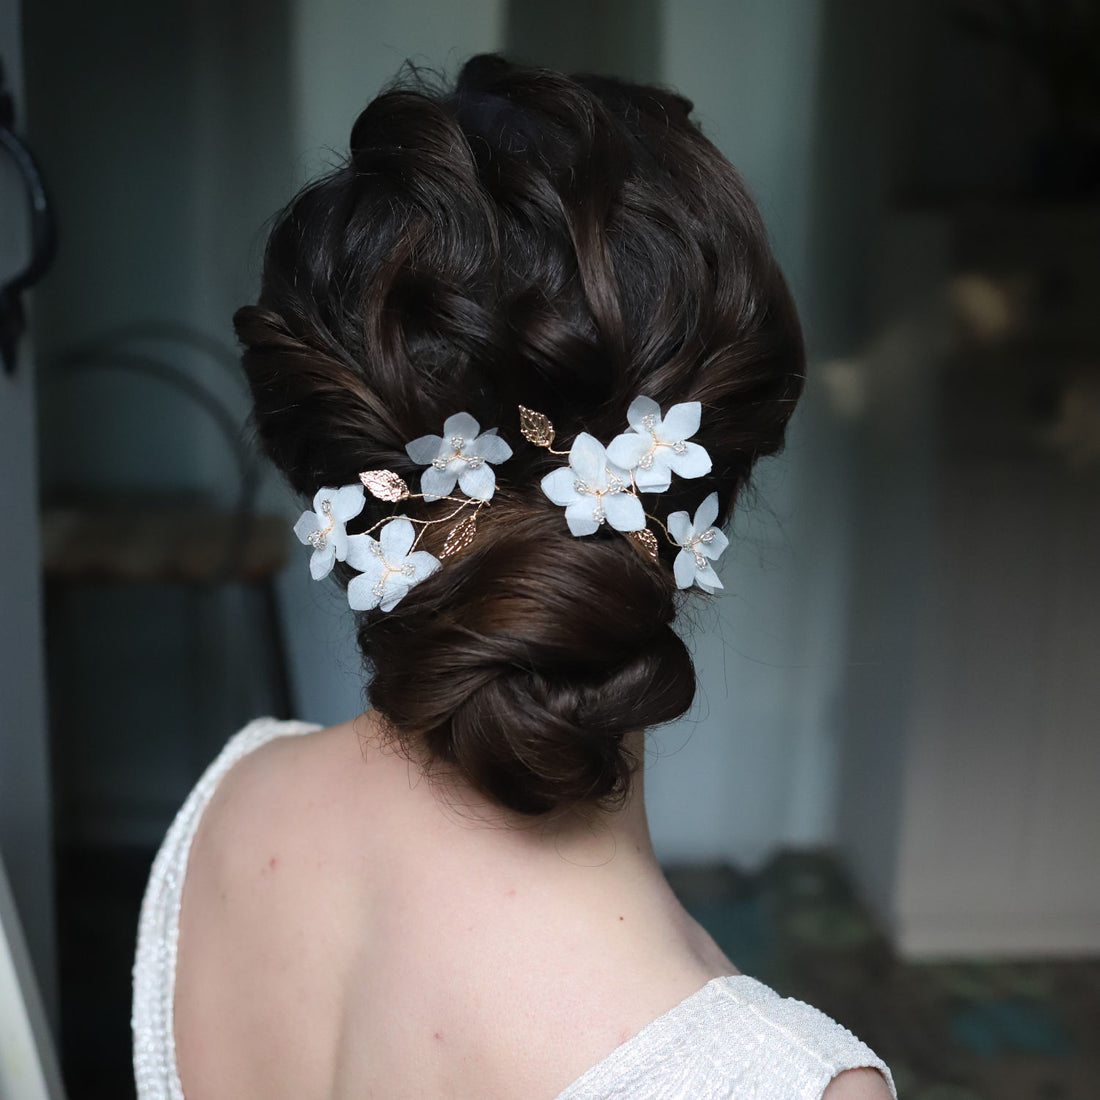 How to Choose Your Bridal Hair Accessories